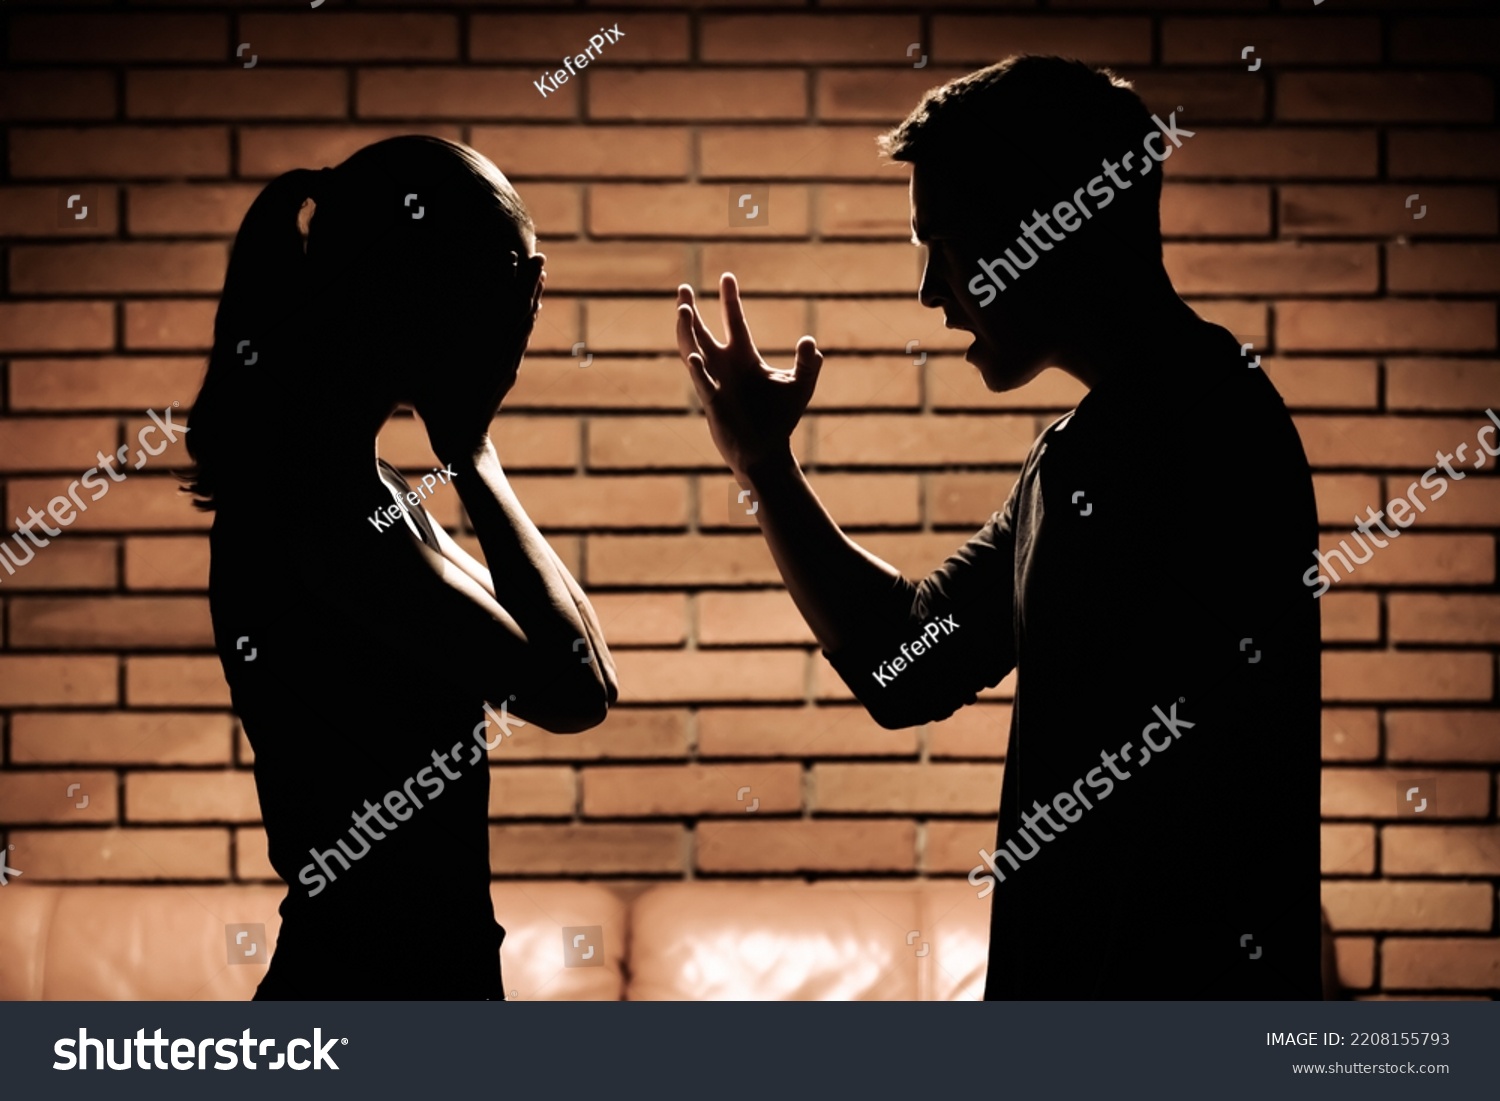 Man screaming verbal insults to woman. Domestic abuse and bad relationship concept.  #2208155793